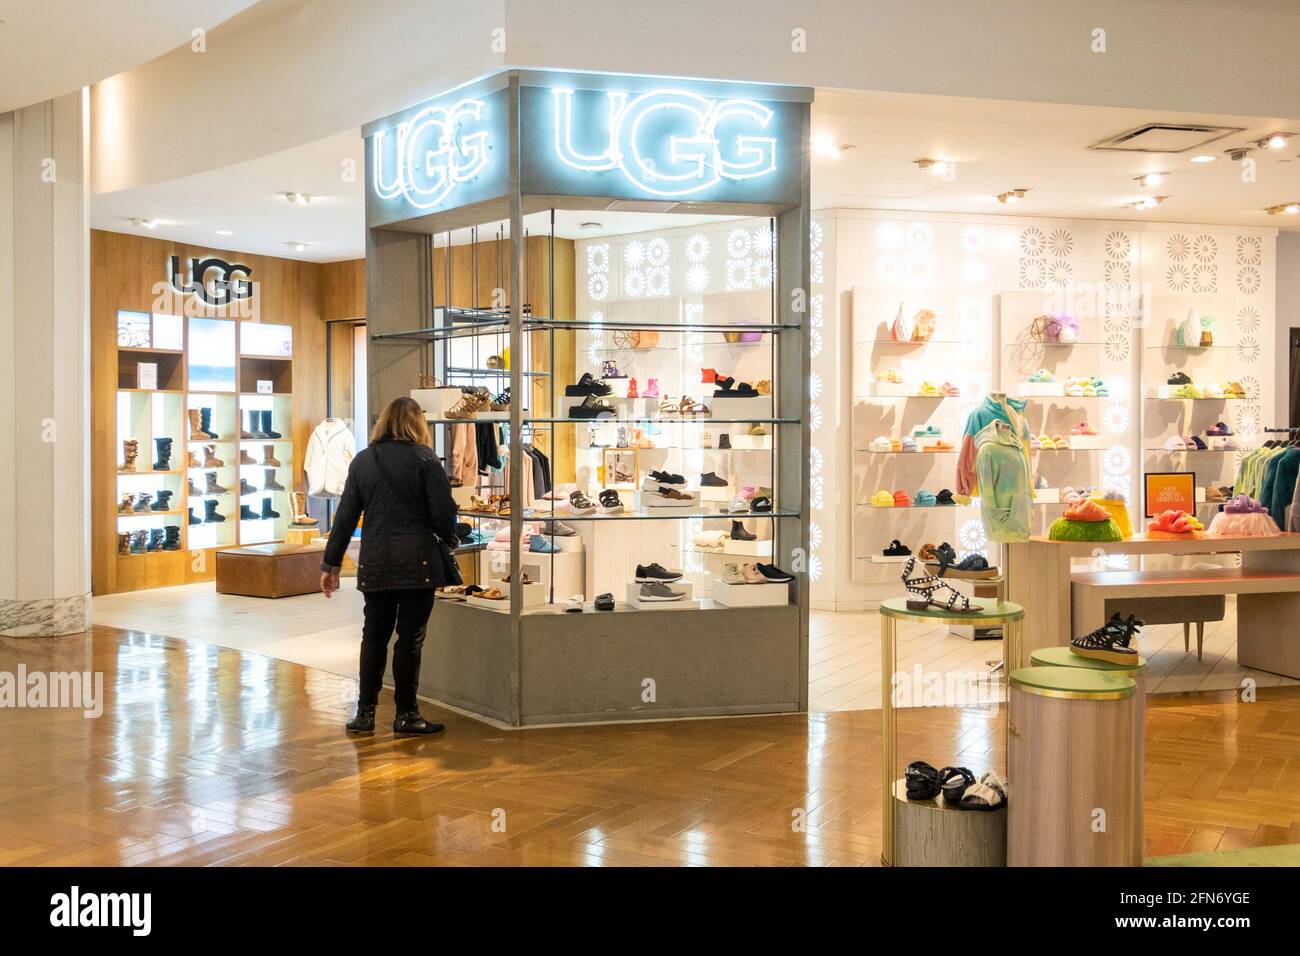 Ugg shoe section in Macy's flagship department store in New York City ...